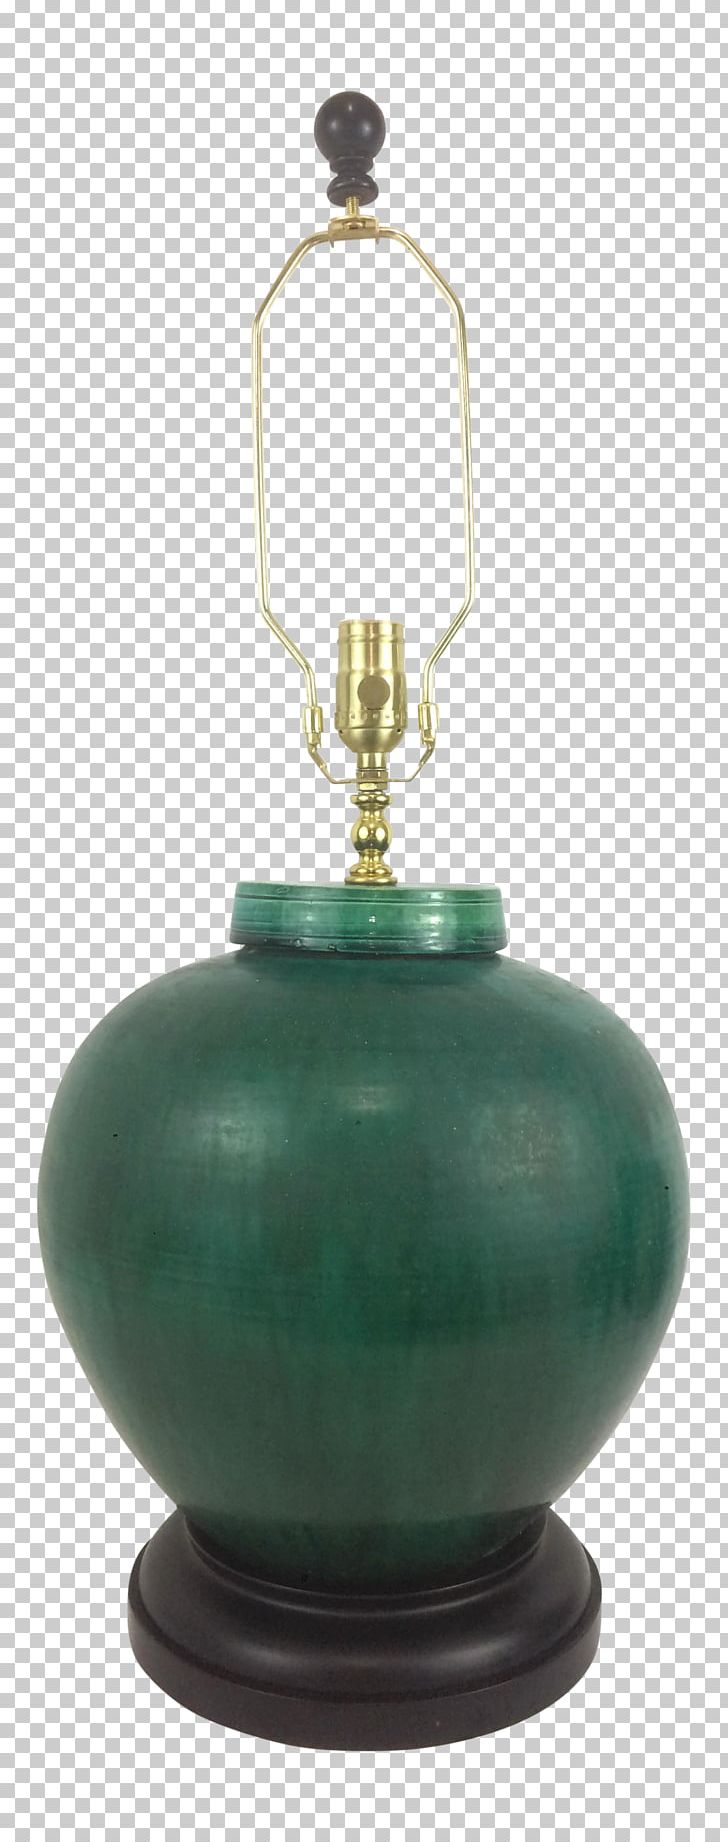 Chinese Ceramics Pottery Jar Table PNG, Clipart, Artifact, Ceramic, Chairish, Chinese Ceramics, Jar Free PNG Download